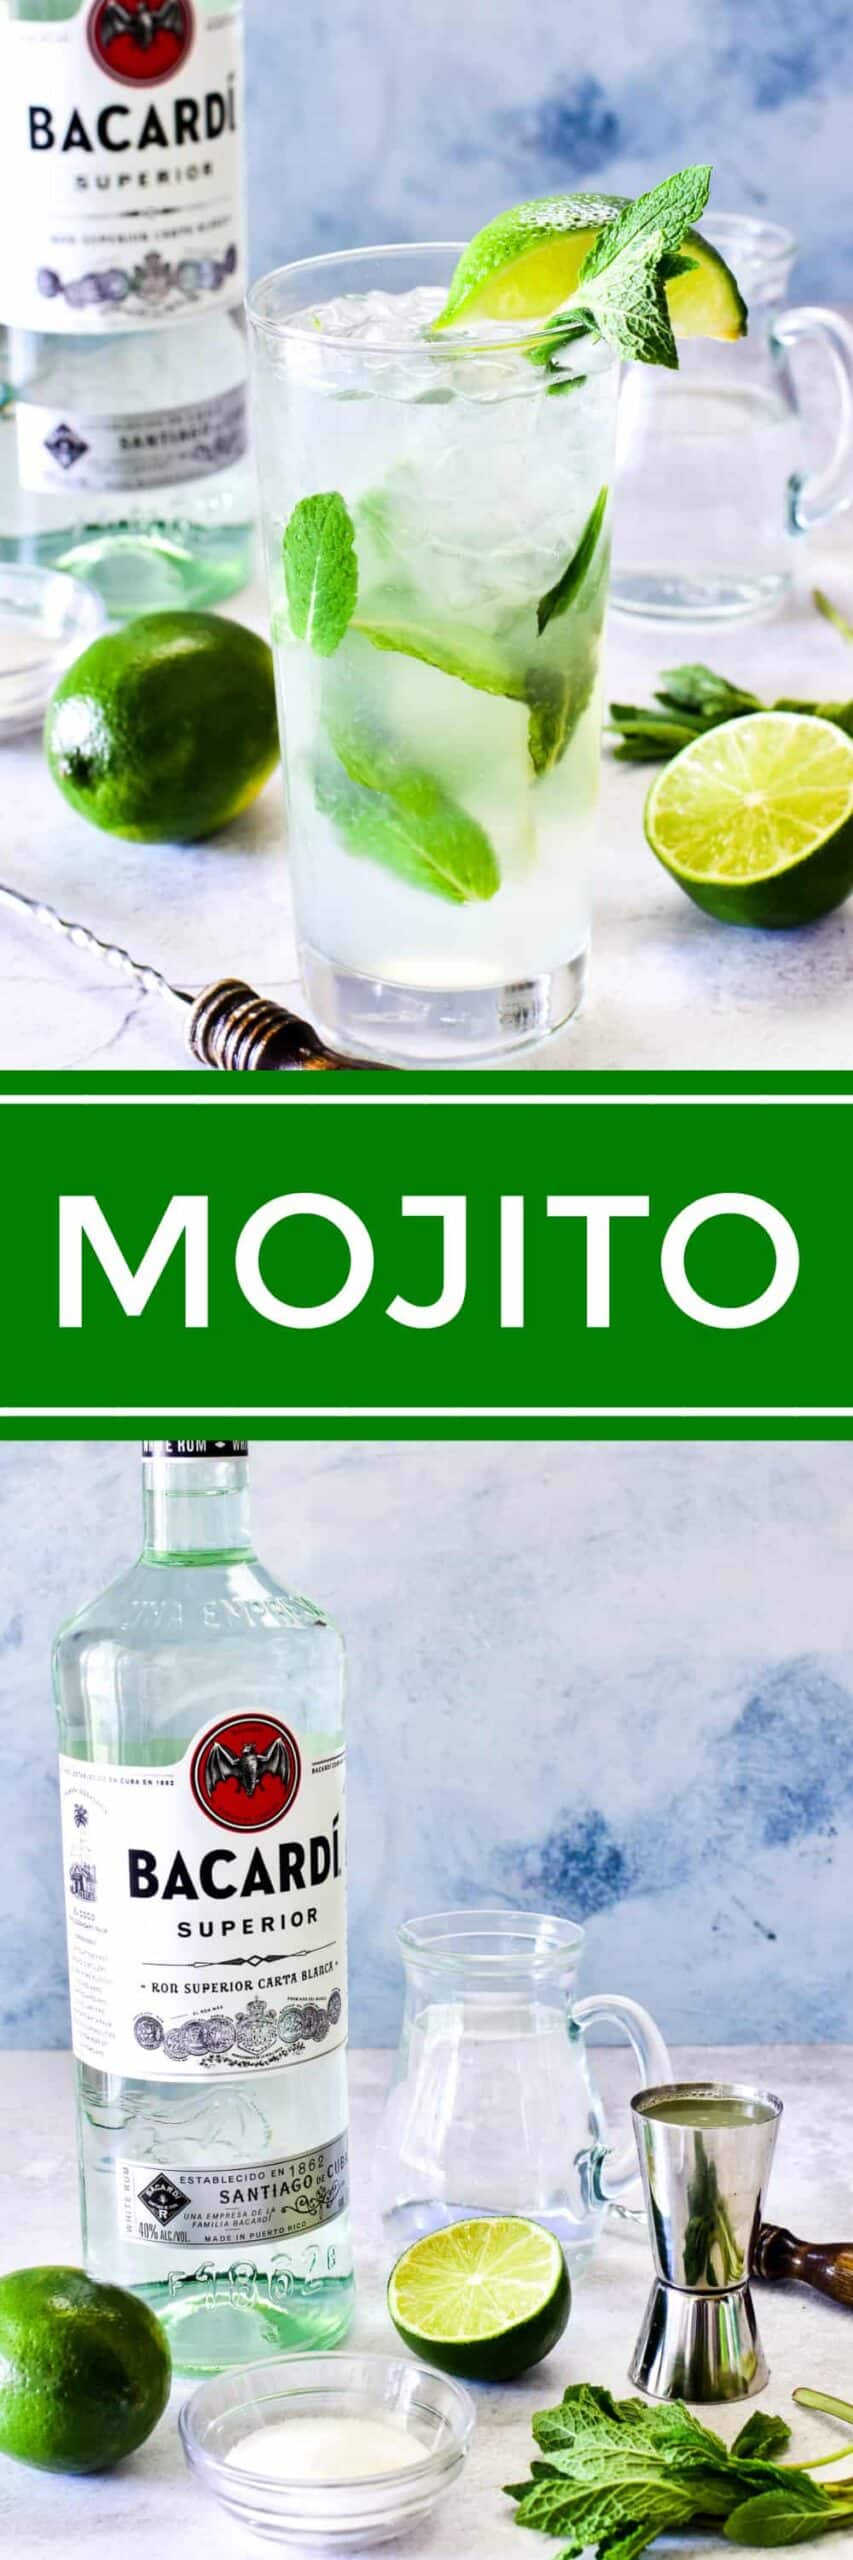 Collage image of Mojito ingredients and assembled drink